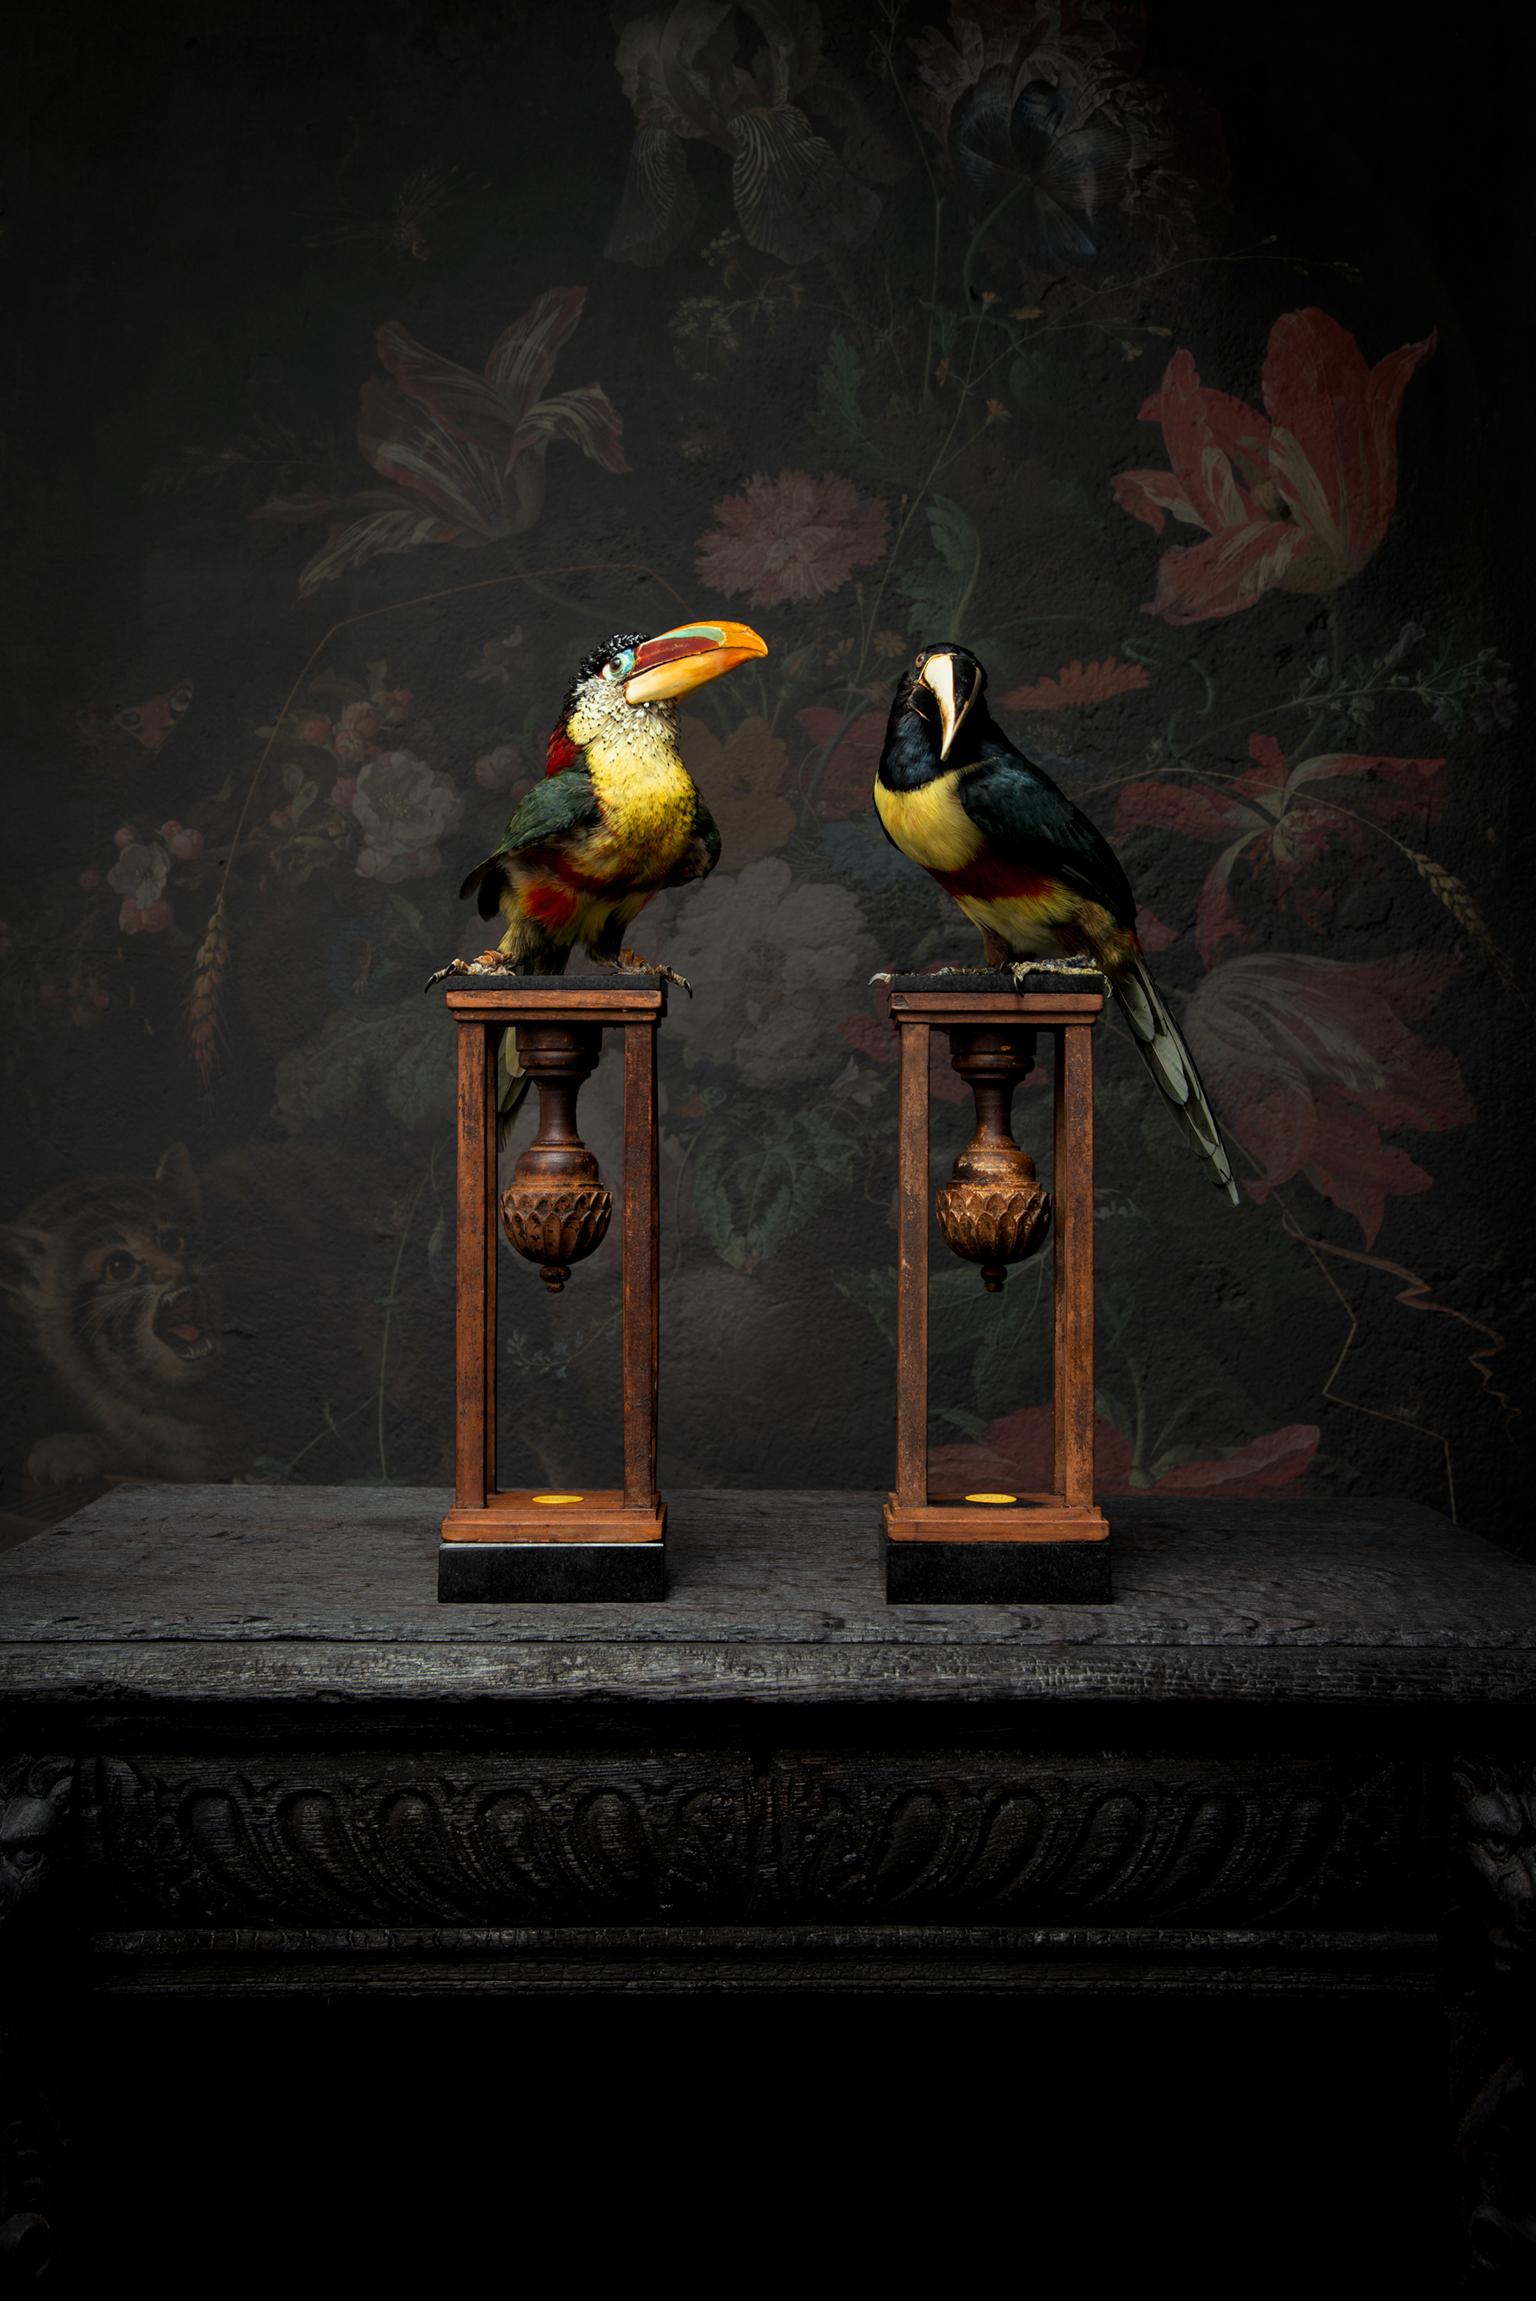 A Black-necked Aracari and Curl-crested Aracari duo under antique glass domes

Note. All animals used for their work came from captivity and died on natural causes. No animals are raised or killed for their work.

The works of Dutch Artists Sinke